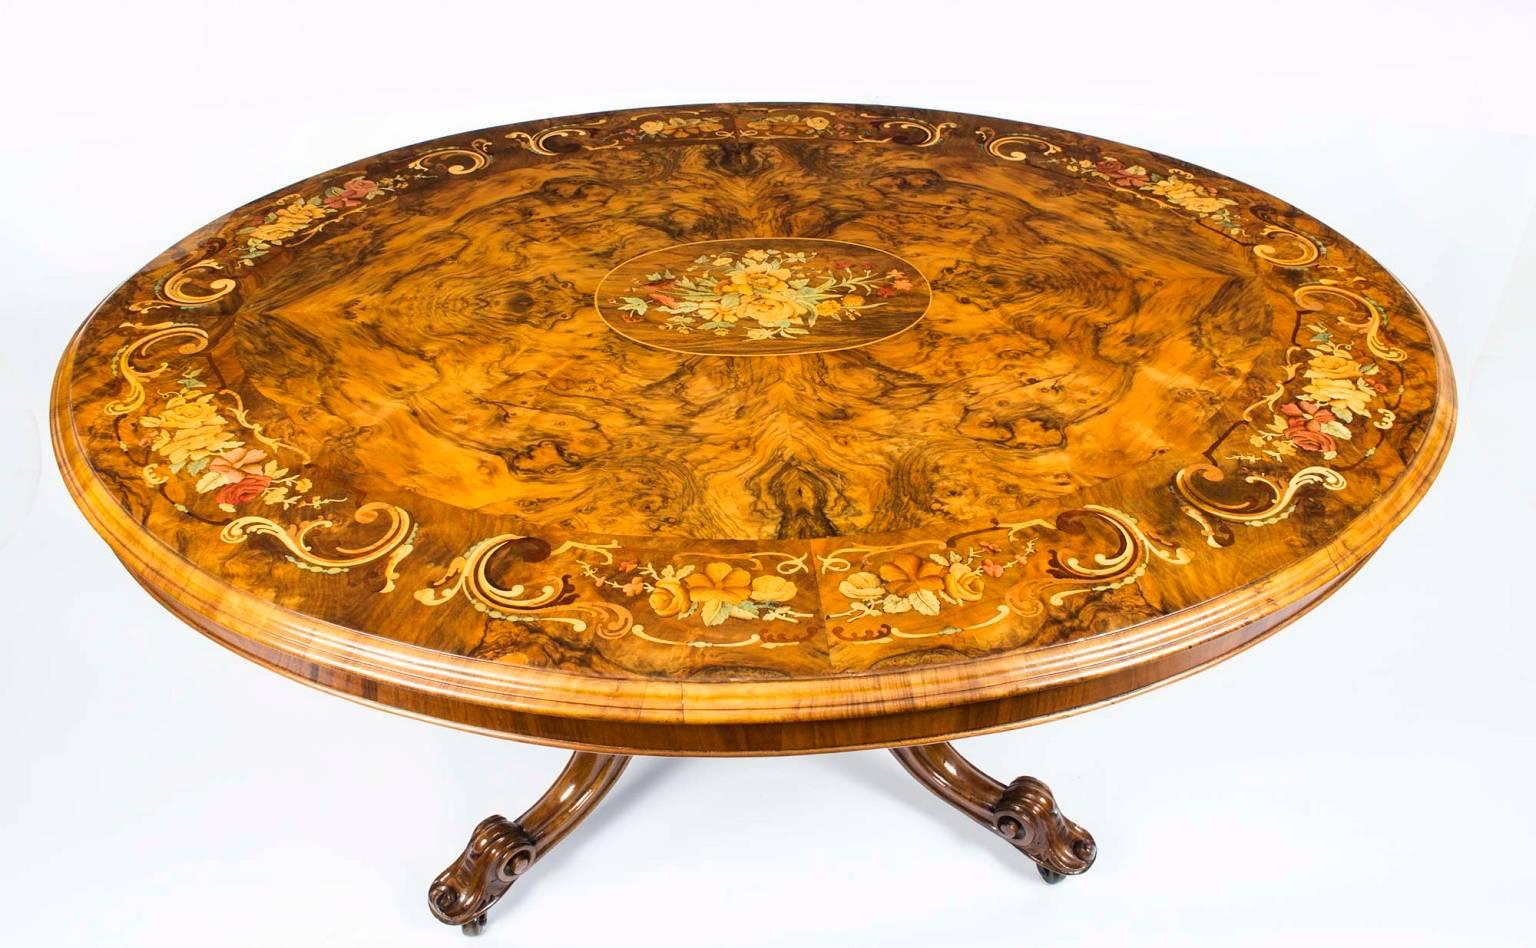 This is a superb Victorian burr walnut and marquetry loo table, circa 1860 in date.

The tabletop is oval in shape and features wonderful butterflied burr walnut with superb marquetry floral inlaid decoration. The base is hand-carved from solid